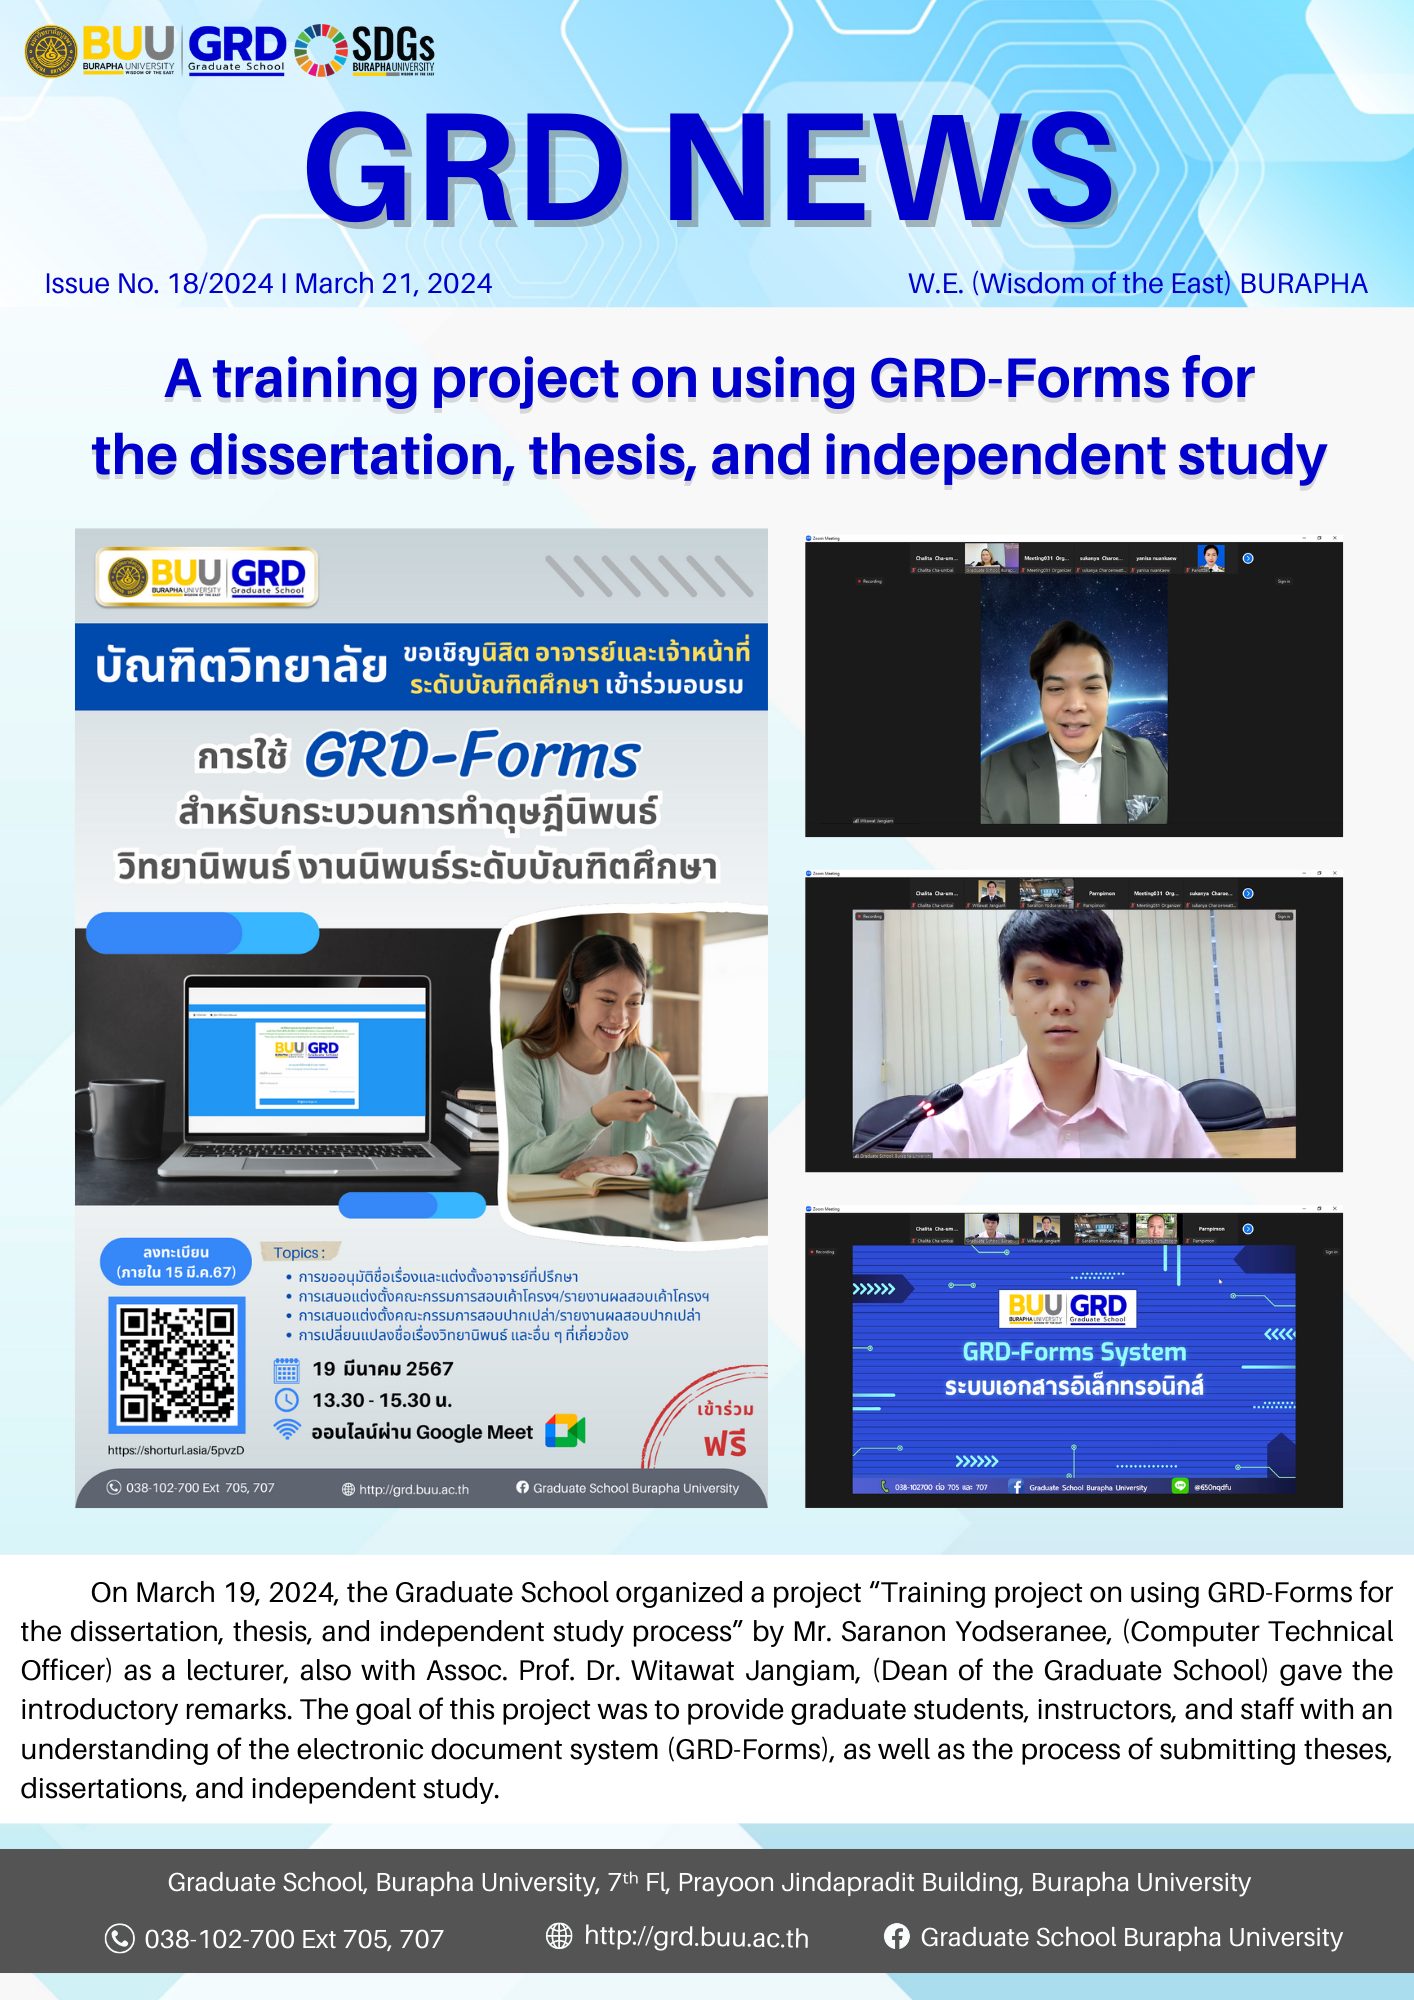 A training project on using GRD-Forms for the dissertation, thesis, and independent study